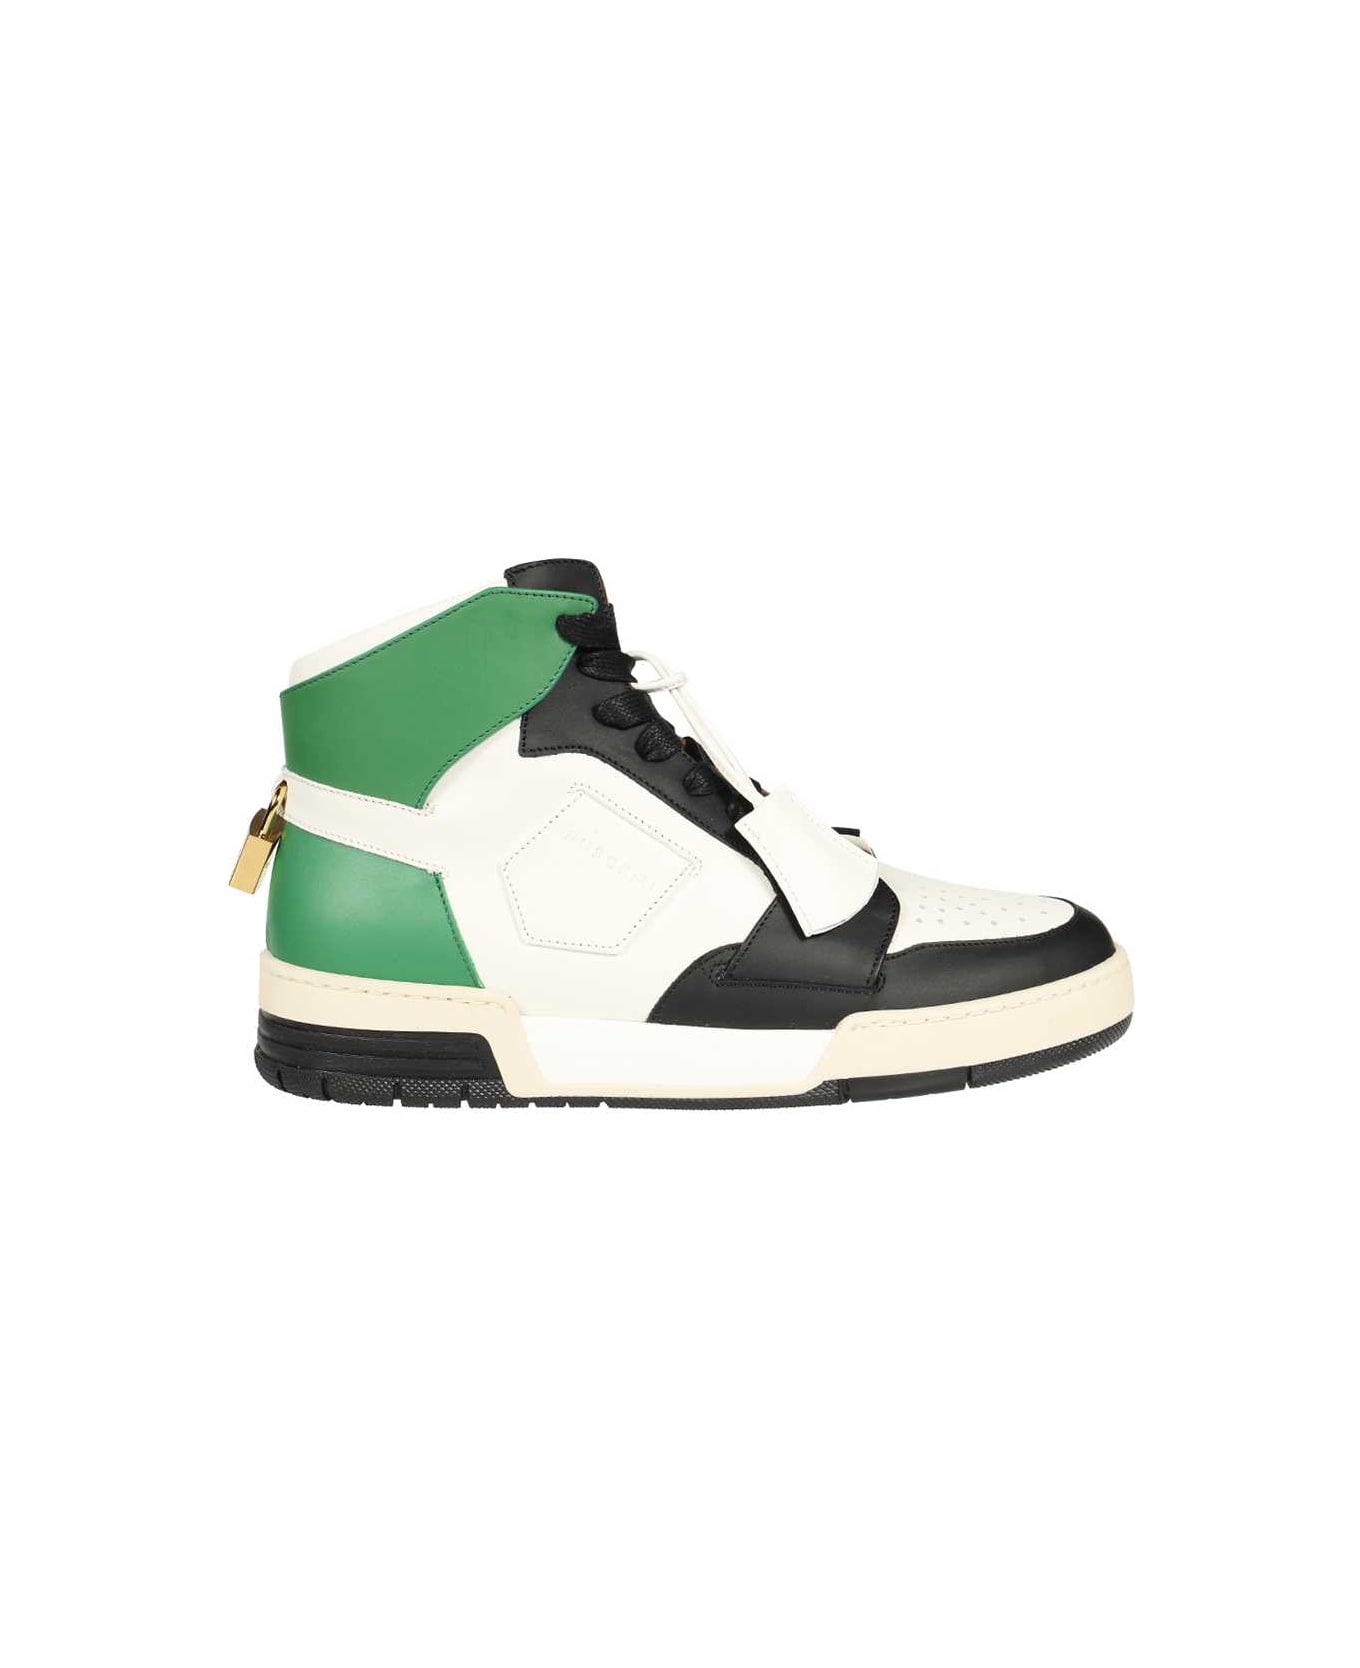 Buscemi Leather High-top Sneakers - green